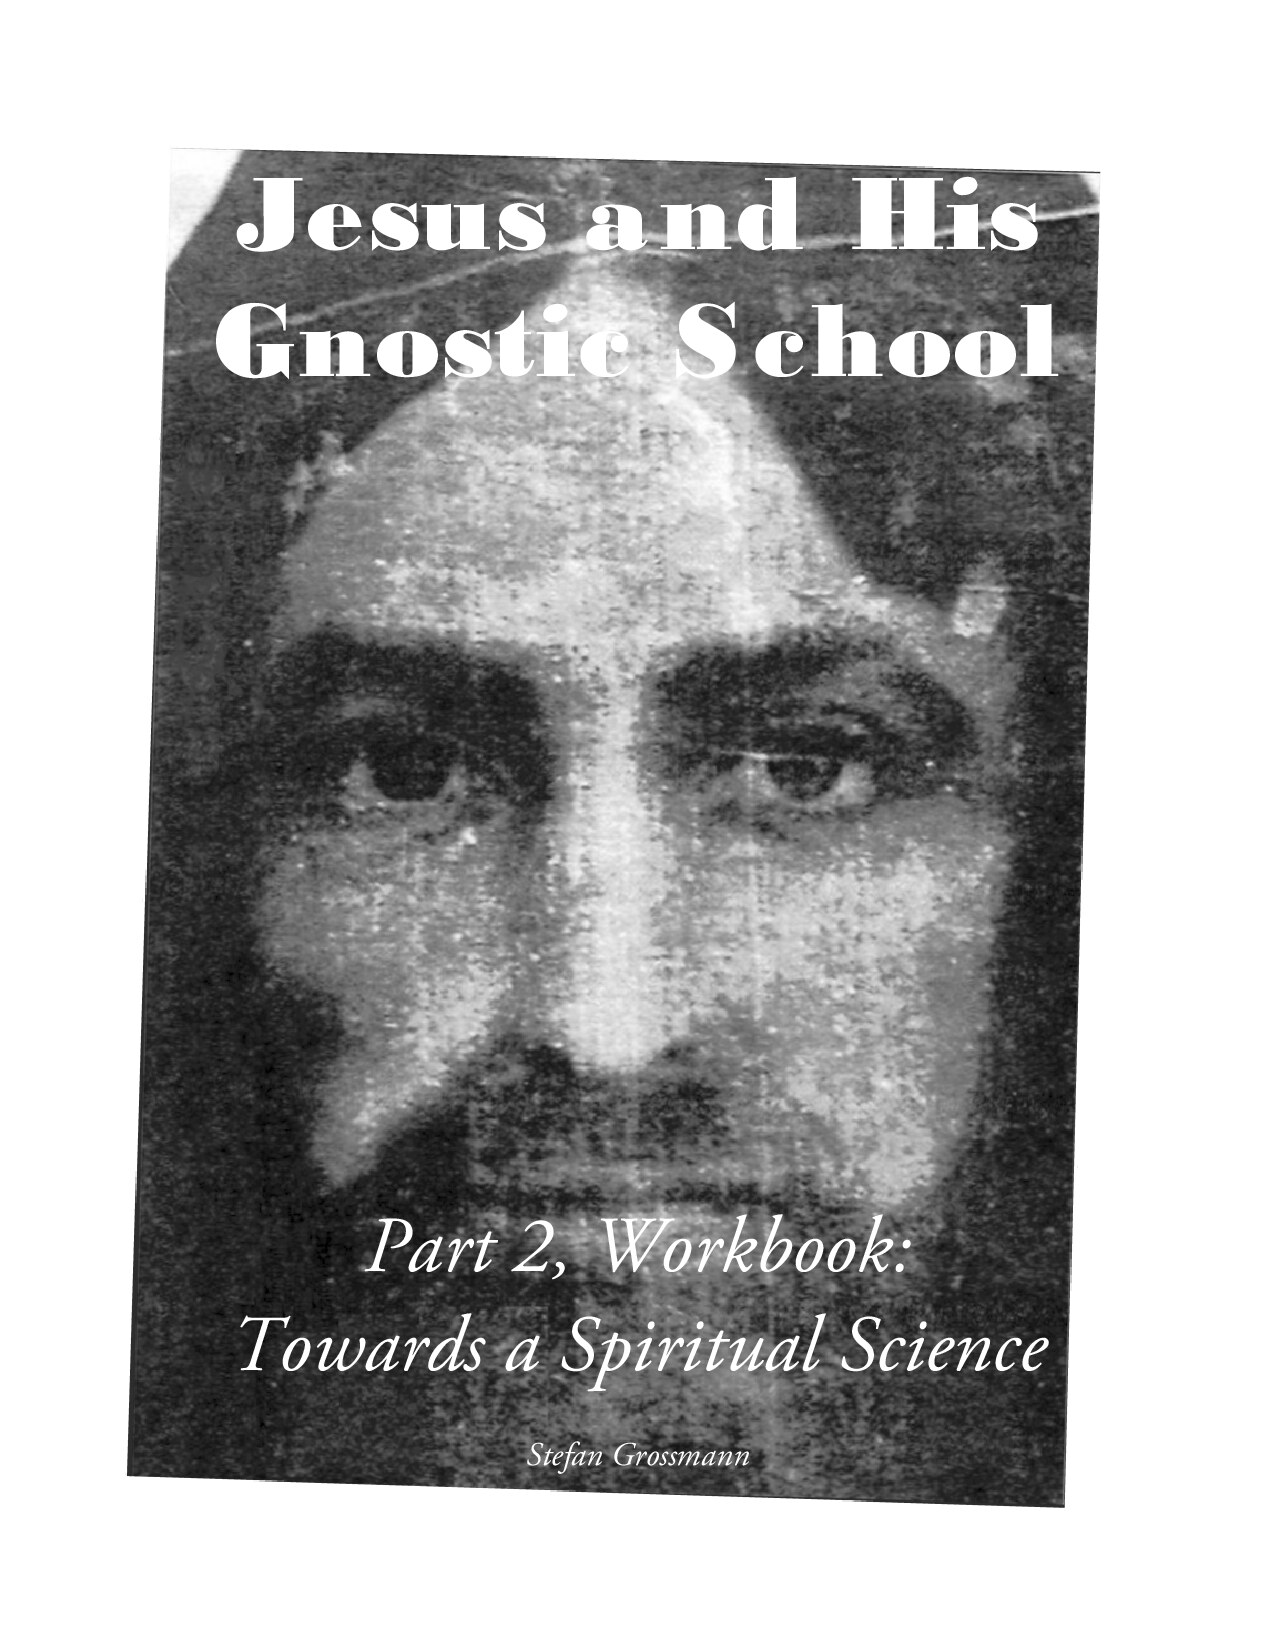 Jesus and His Gnostic School - Part 2, Workbook: Towards a Spiritual Science